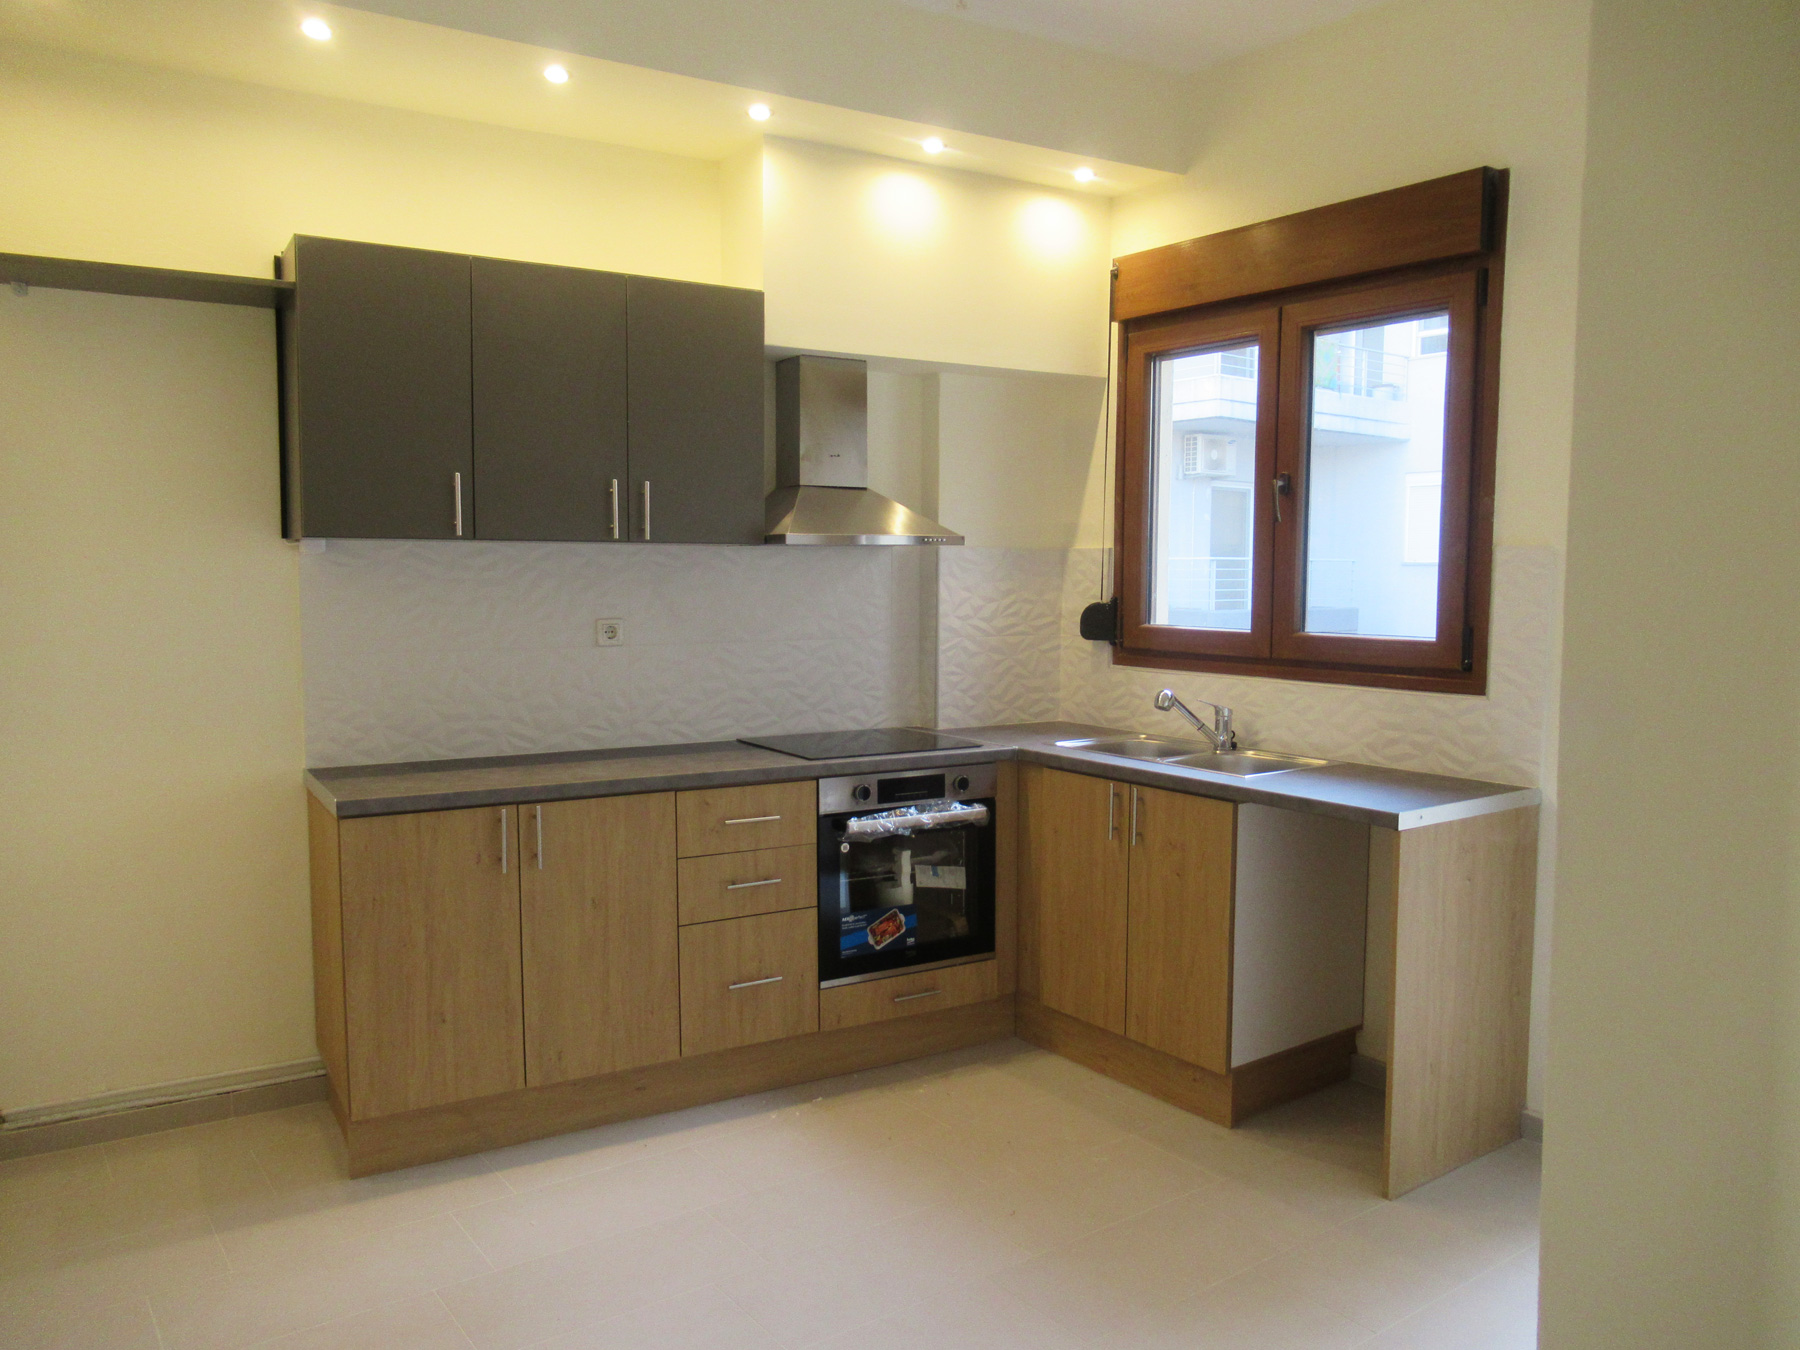 For rent, fully renovated 2 bedroom apartment of 77 sq.m. on the 3rd floor of an apartment building in the center of Ioannina.